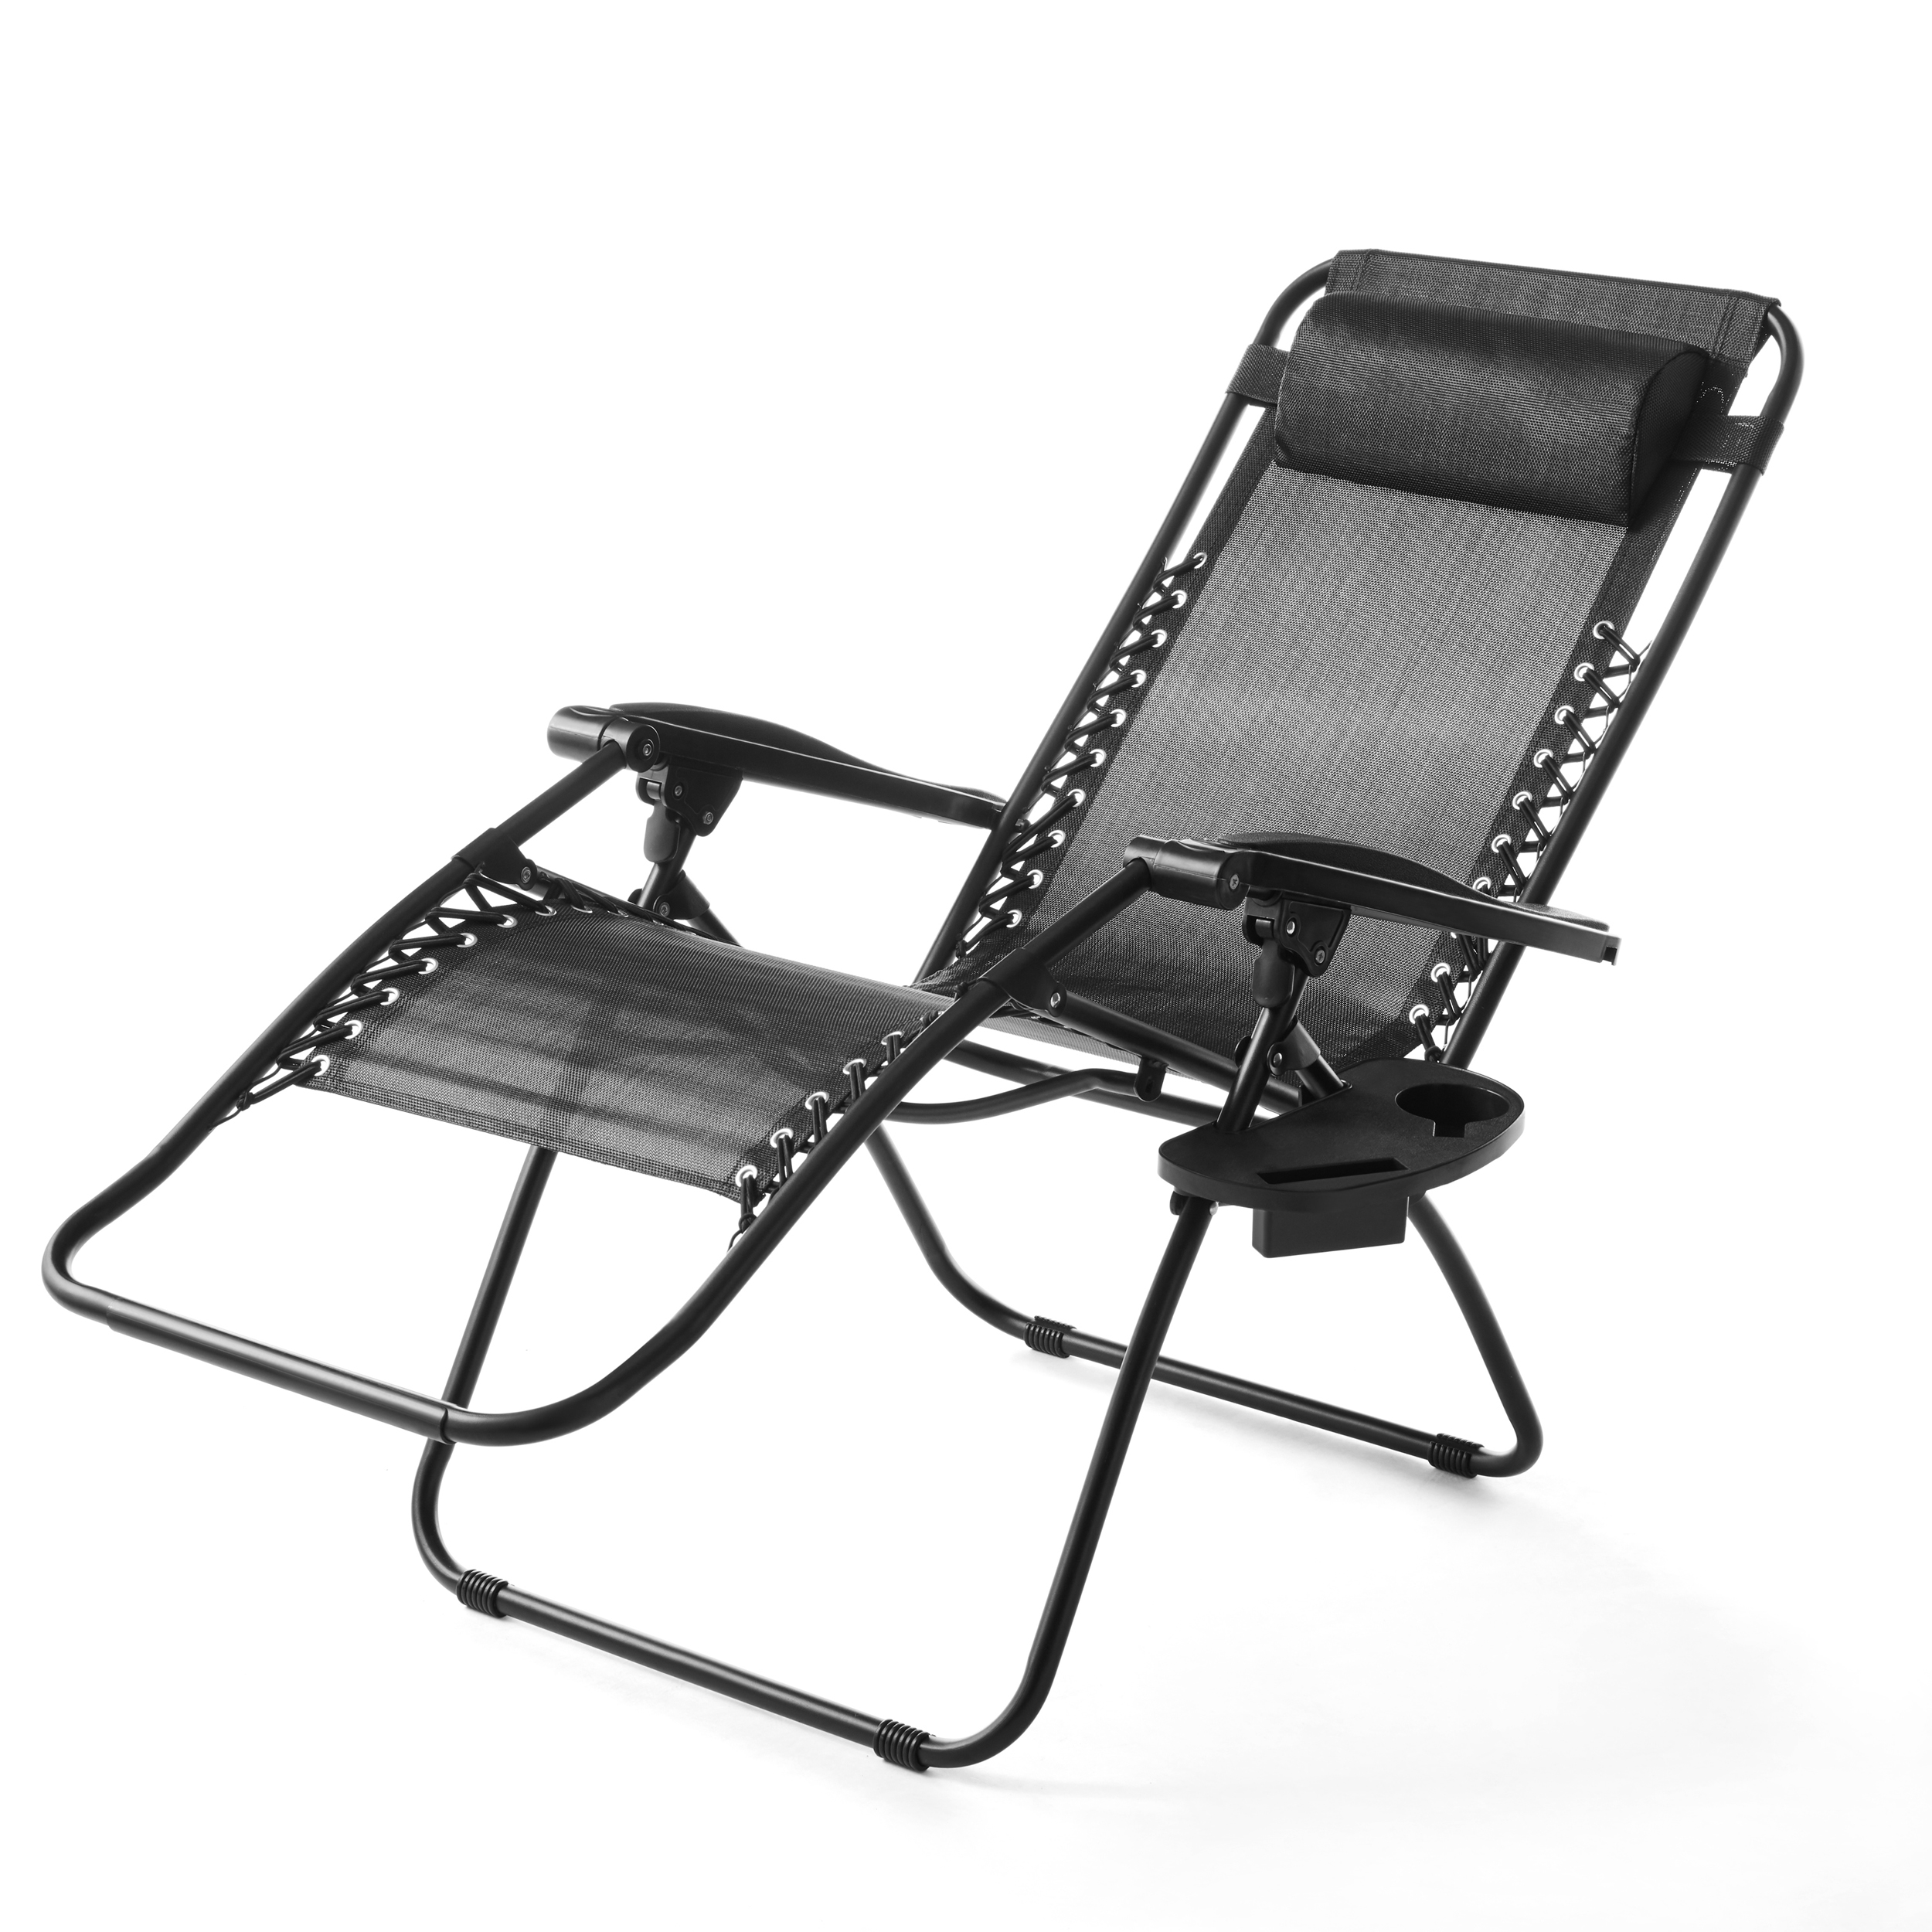 Mainstays Zero Gravity Chair Lounger, 2 Pack - Black - image 4 of 7